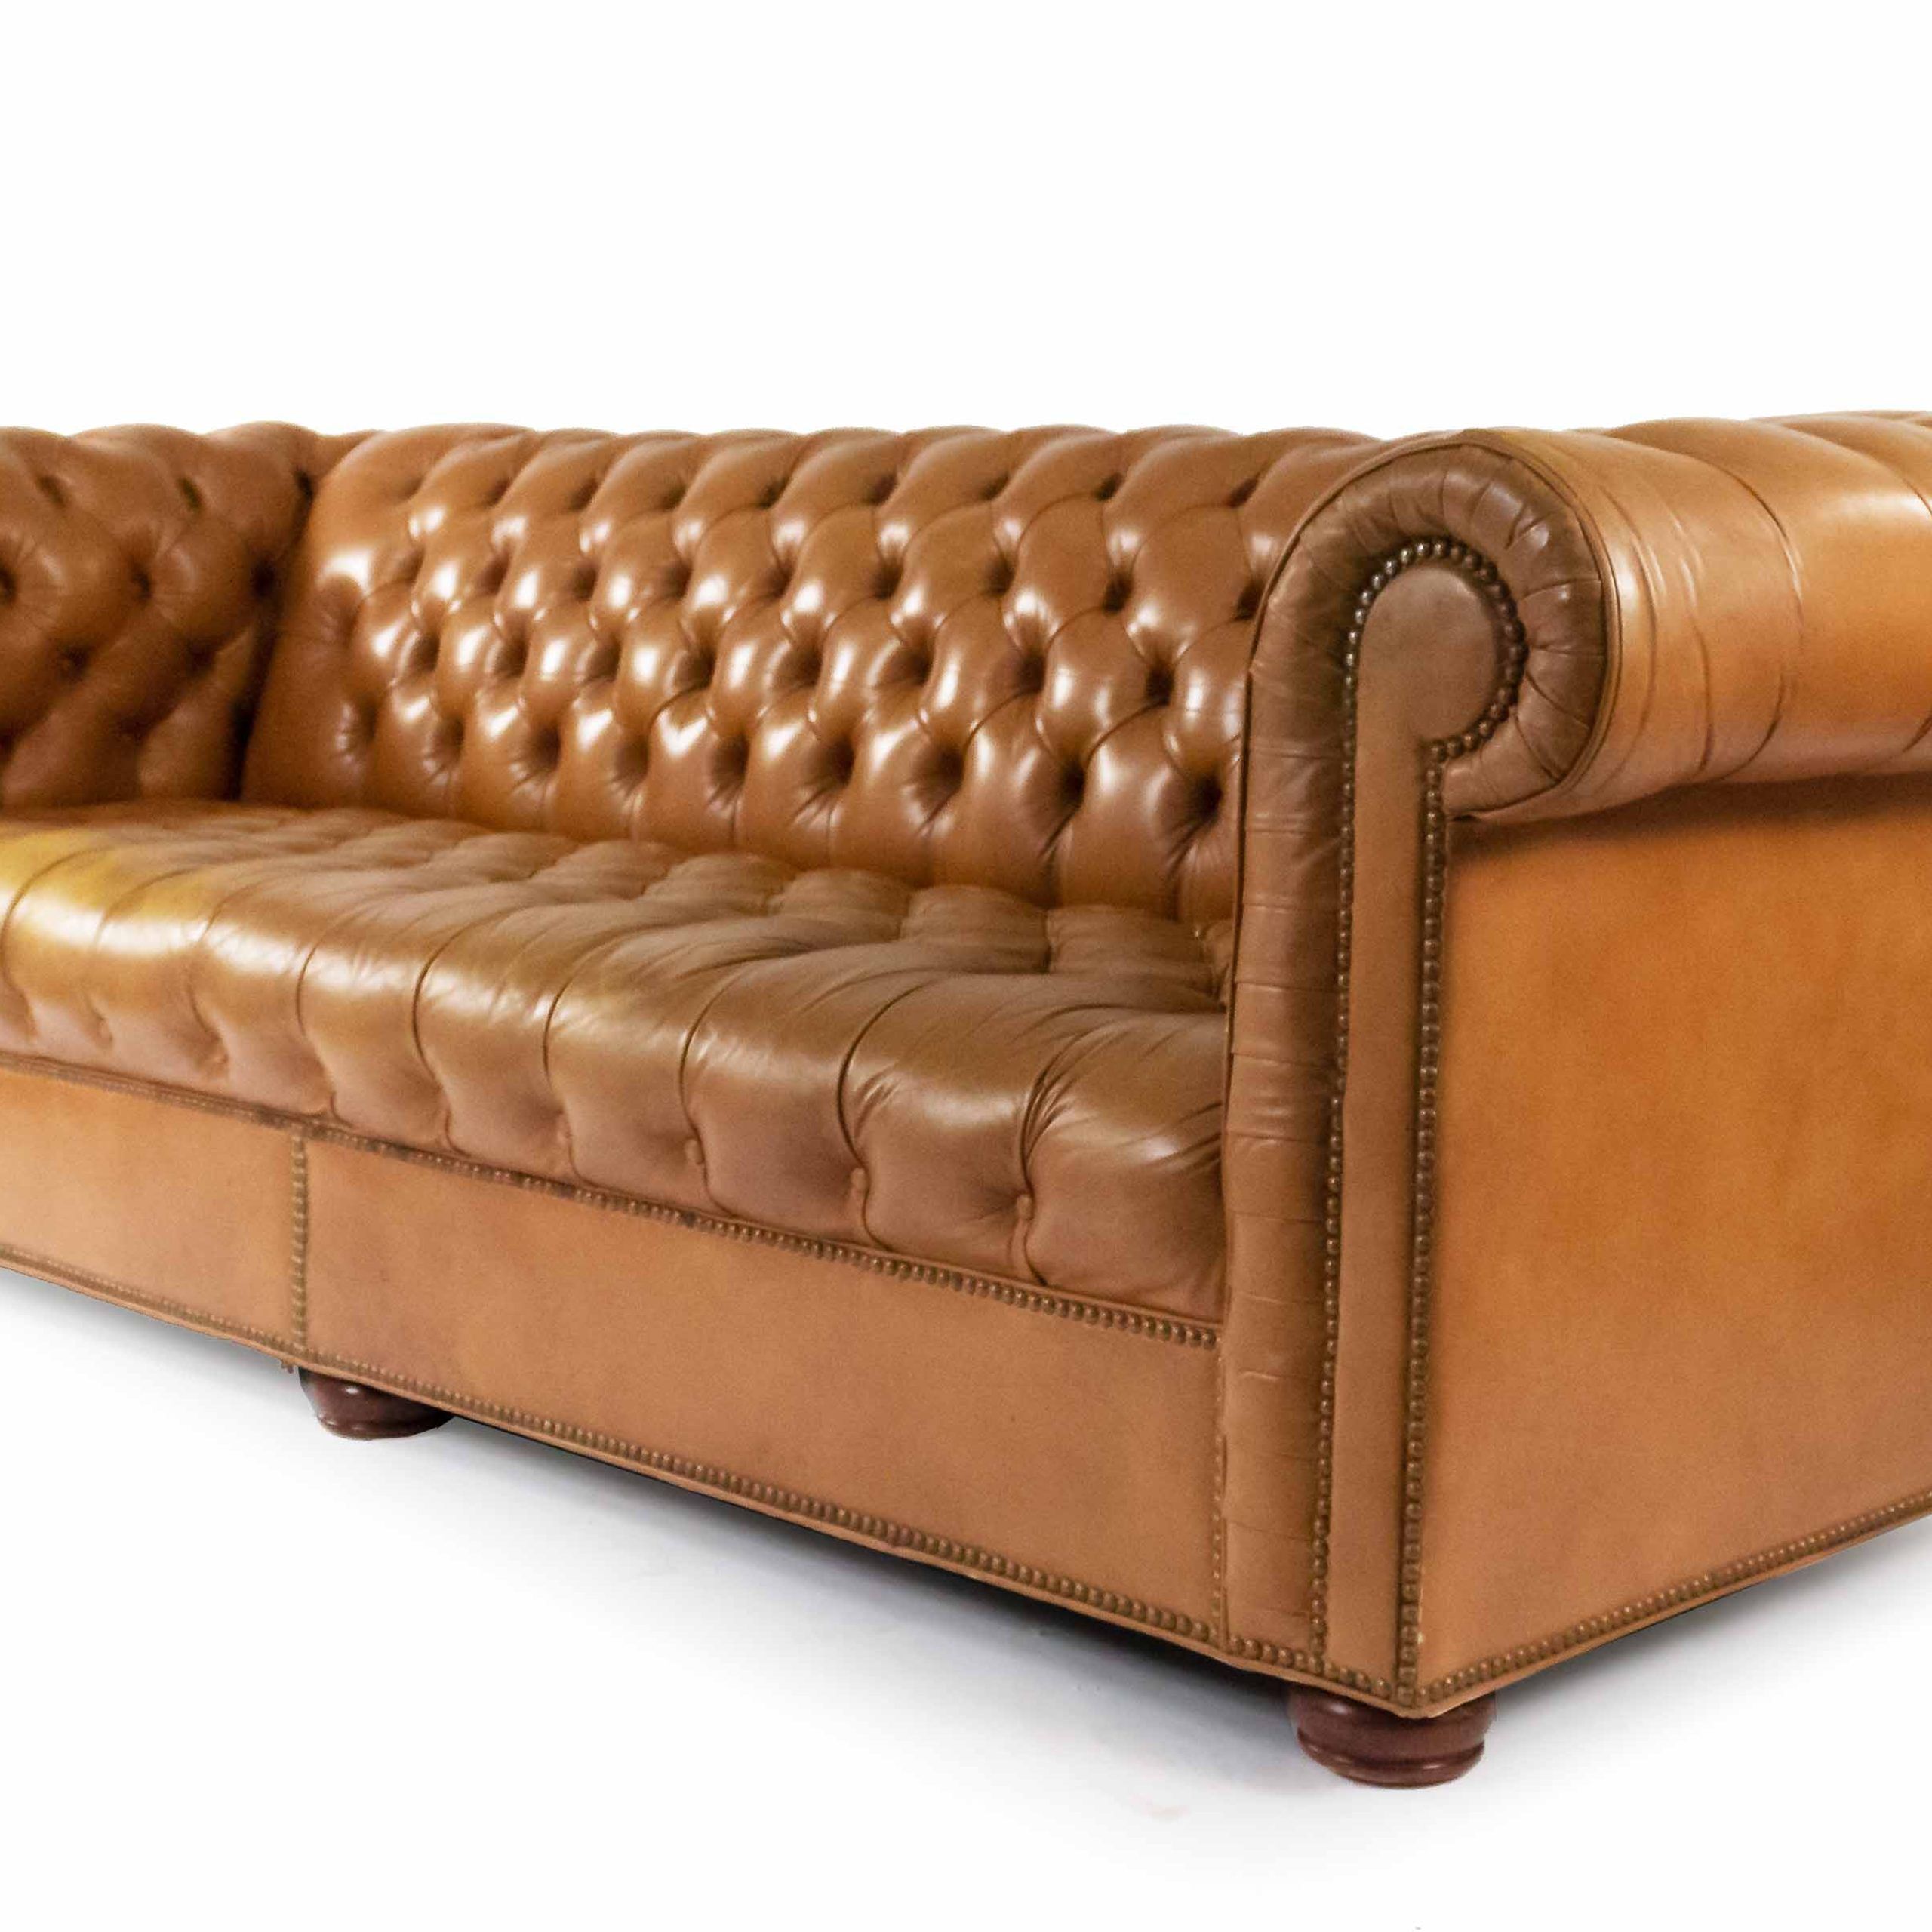 Tobacco Brown Leather Chesterfield Sofa Regarding Chesterfield Sofas (View 10 of 20)